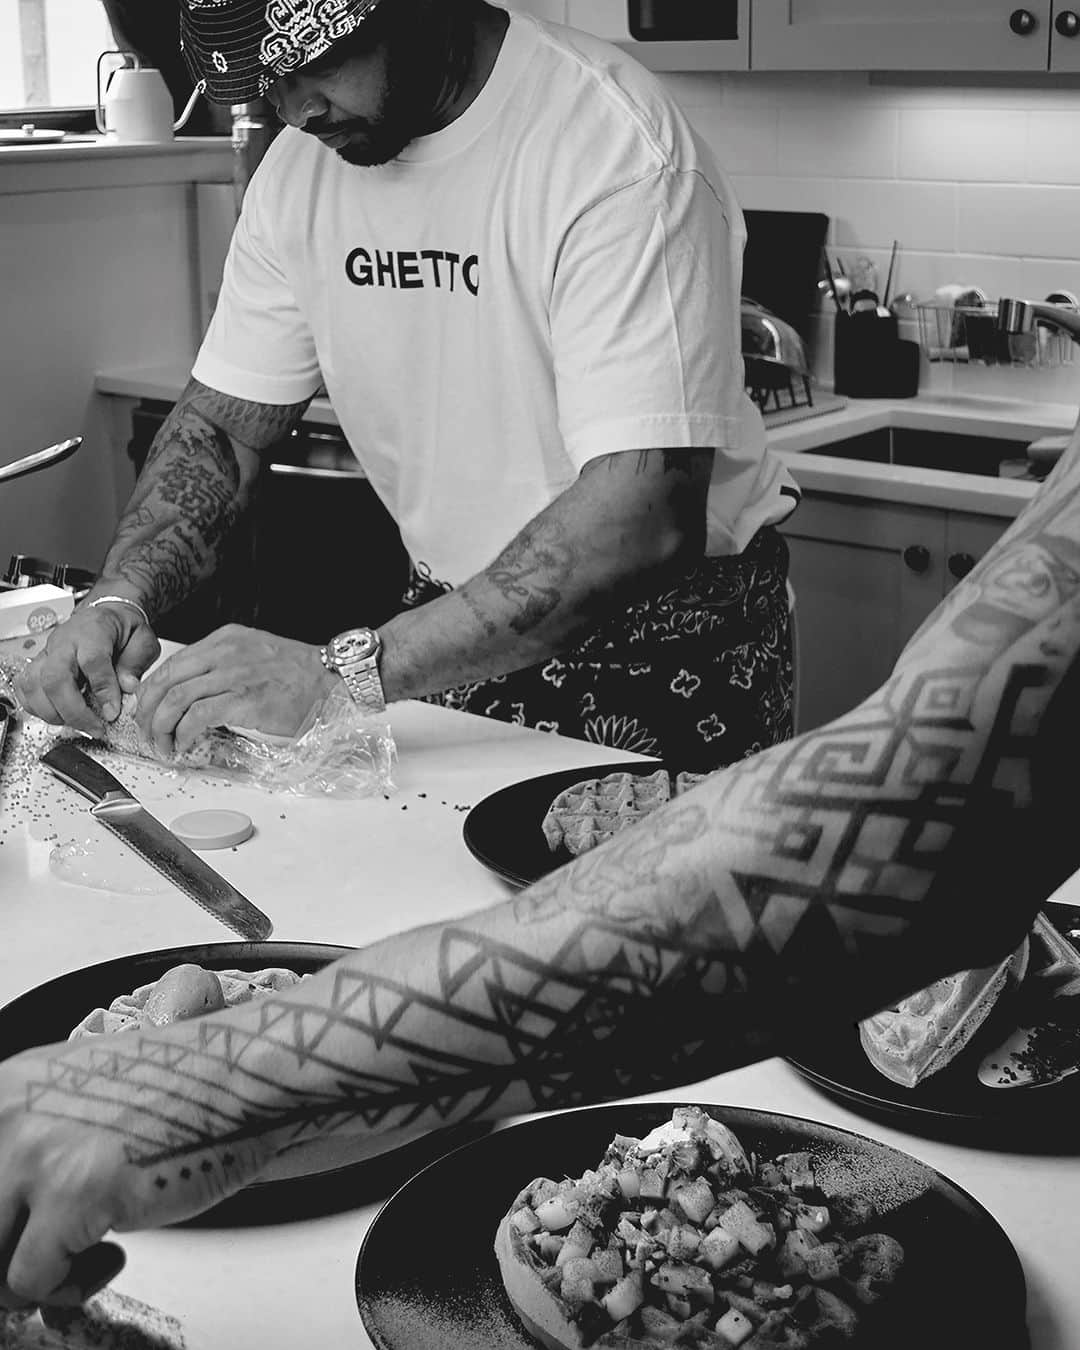 sacaiのインスタグラム：「A MAGAZINE CURATED BY SACAI エー マガジン キューレーテッド バイ サカイ  After collaborating with sacai on a gastro pop-up and capsule collection, the Bronx-based culinary collective @ghettogastro cooks for the soul in #AMagSacai @amagazinecuratedby   ‘When you see the way Chitose approaches patternmaking and the layering, the textures in the clothes, it’s similar to how we do it. We make Ghetto Gastro with the flavour but also with the way that we move through different spaces as a hybrid food company. We show up in art, fashion, activism and food and have a voice but they’re all focused on the same thing: food as the centrepoint.’ @chefp @ghettogray @cheflesterwalker #ghettogastro  Photography by @katsunaito  #sacaiofficial  #GhettoGastro」